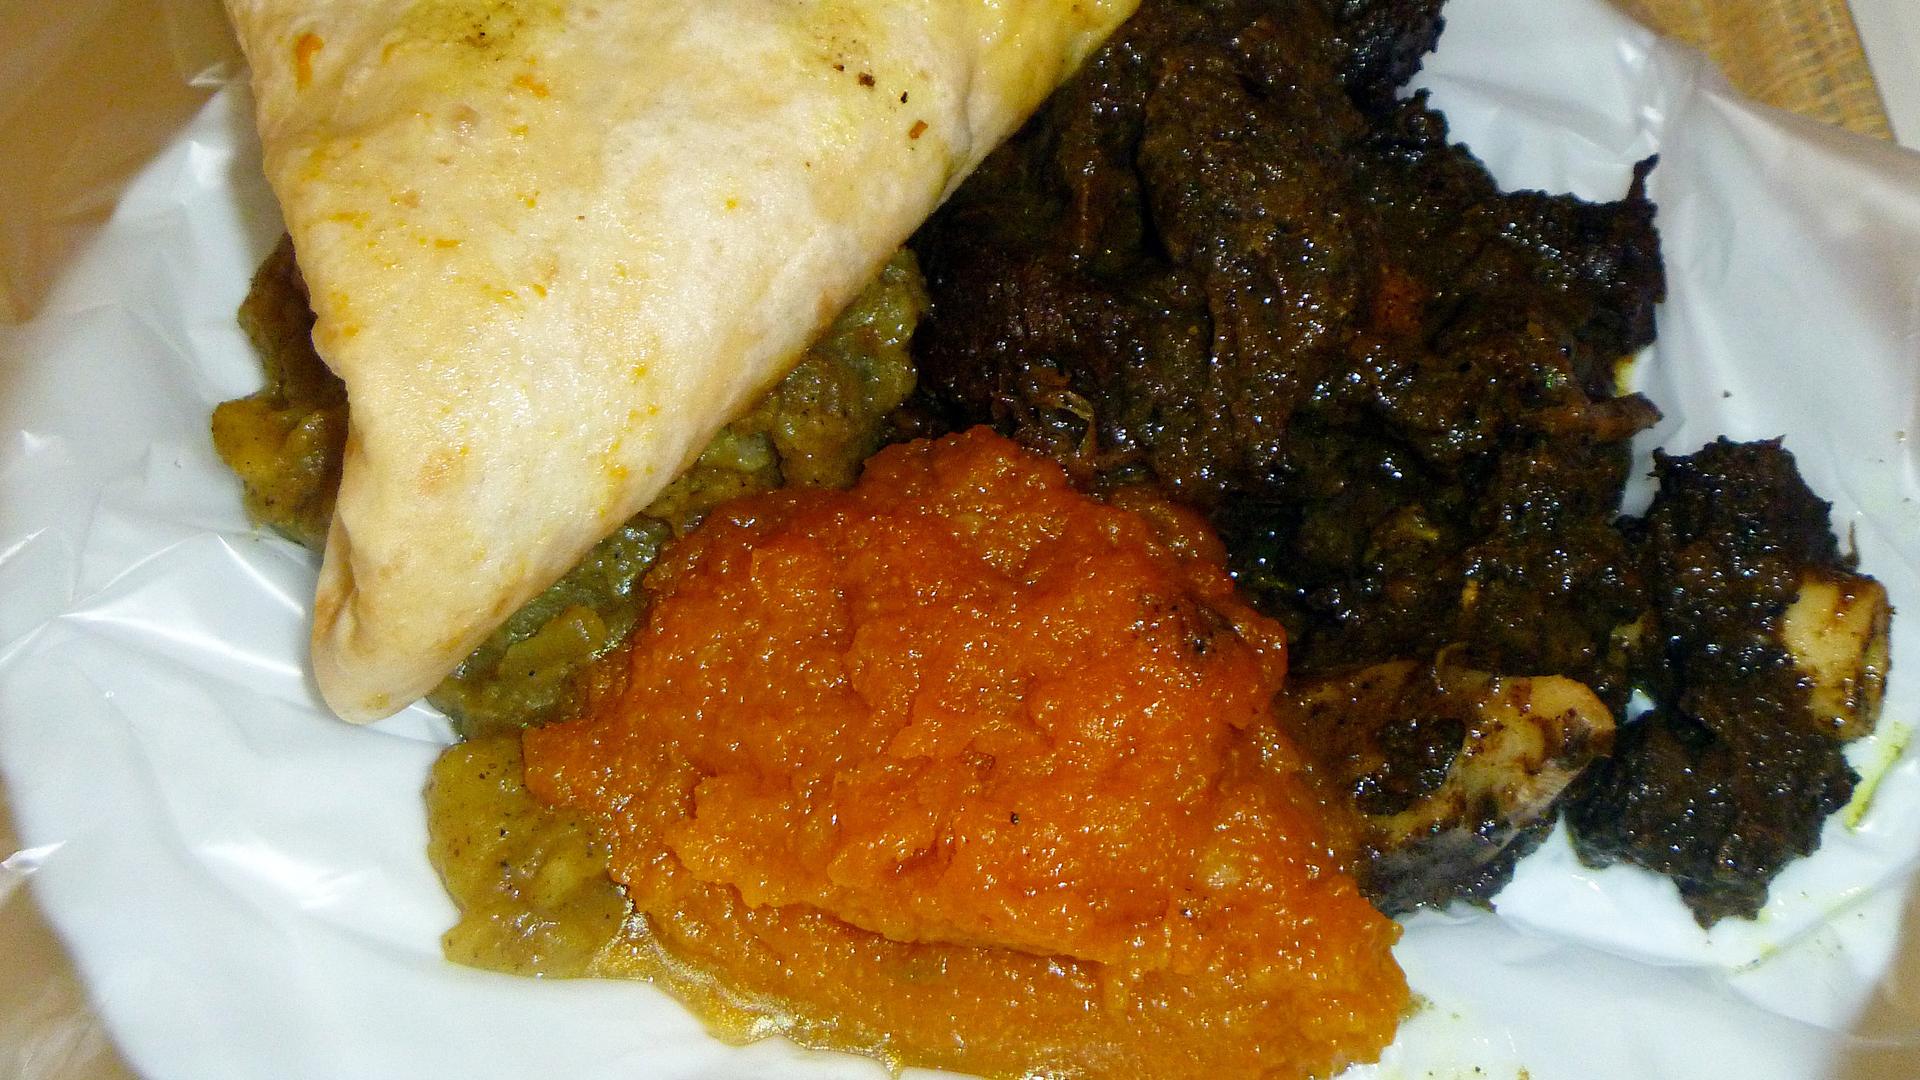 Dhalpurie roti served with pumpkin, potato and goat meat curry.